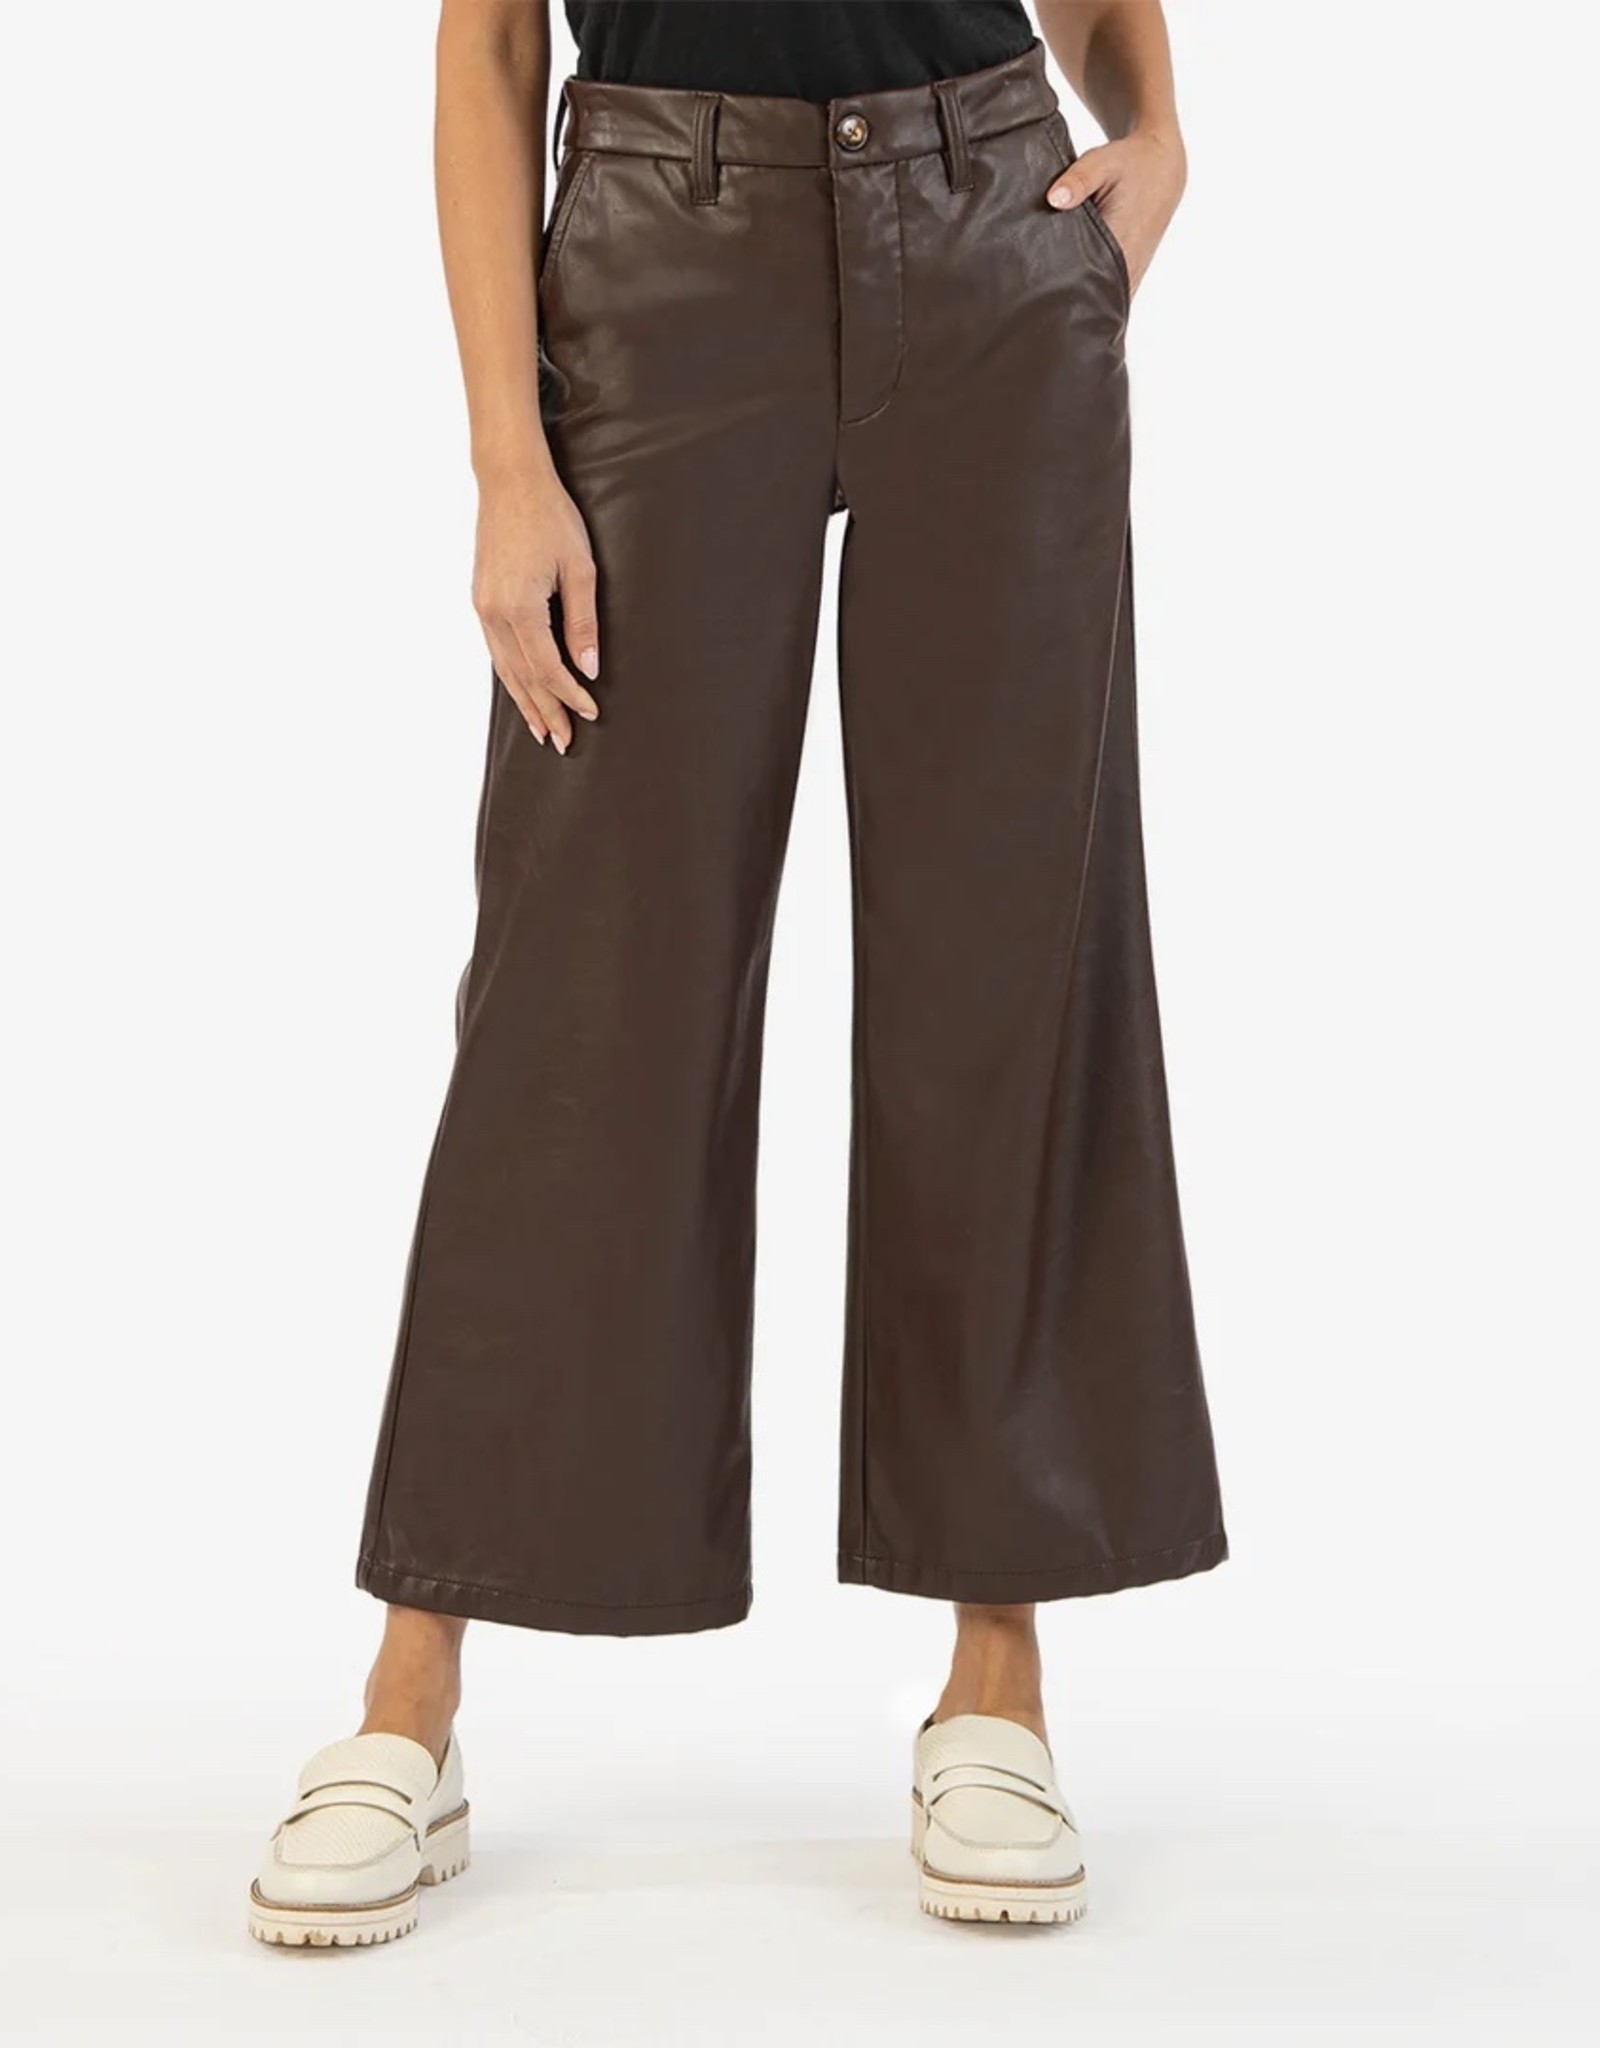 Kut From the Kloth KUT Aubrielle Wide Leg Ankle Pant Chocolate